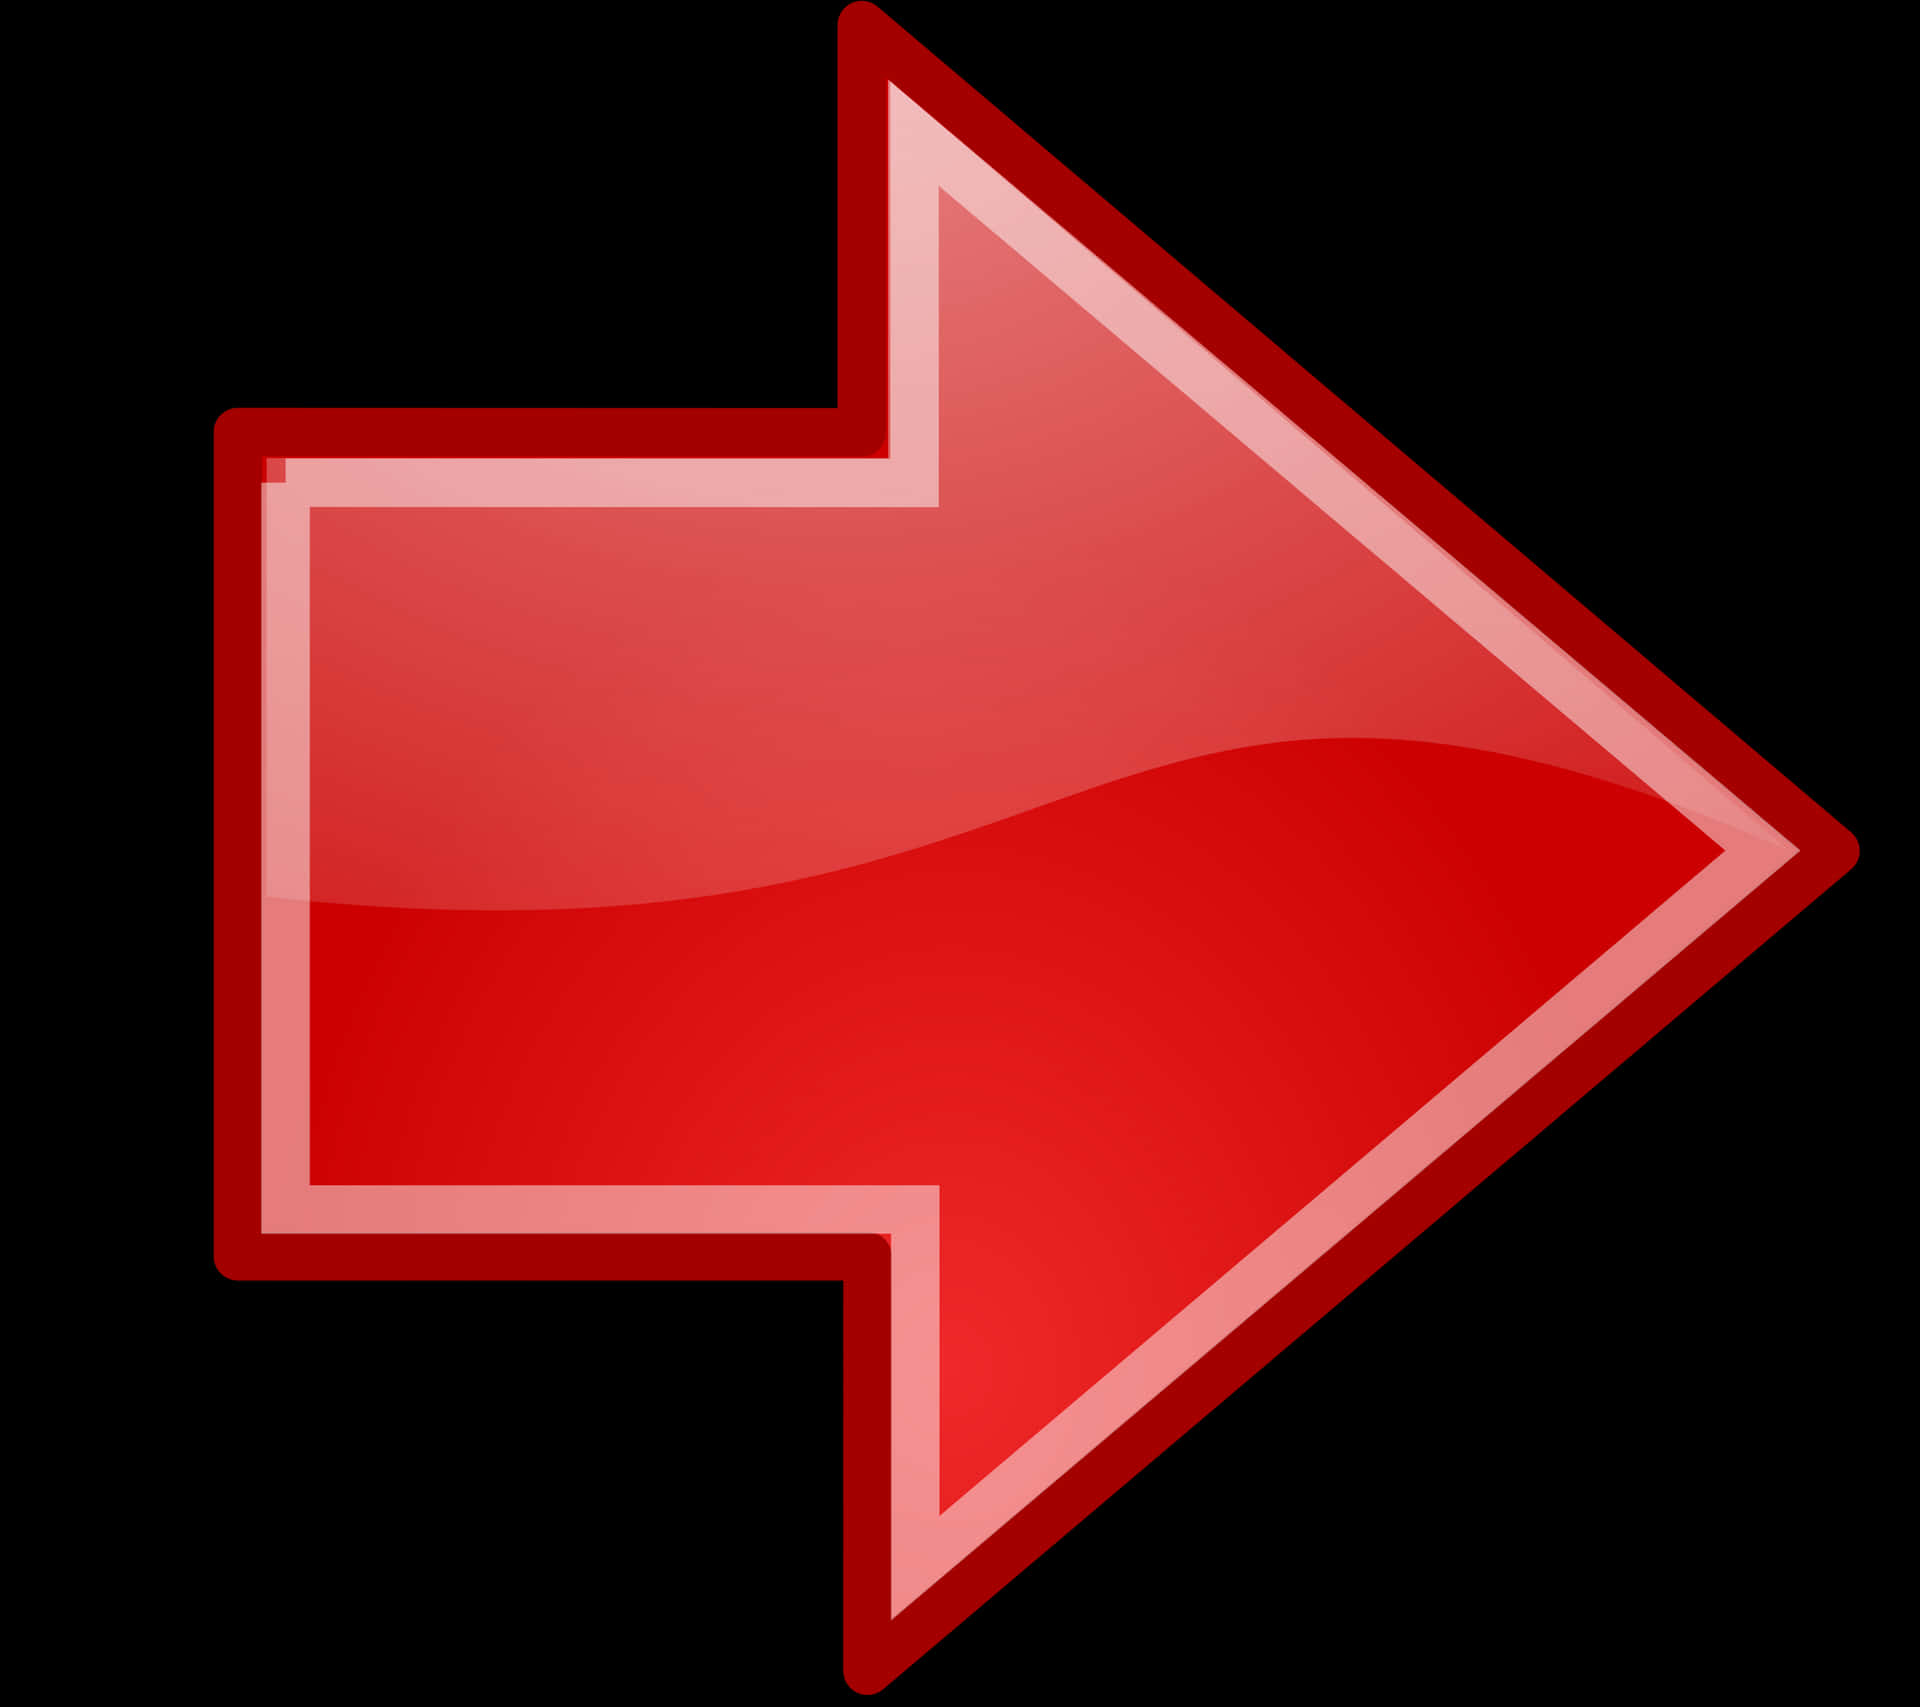 Glossy Red Arrow Graphic PNG